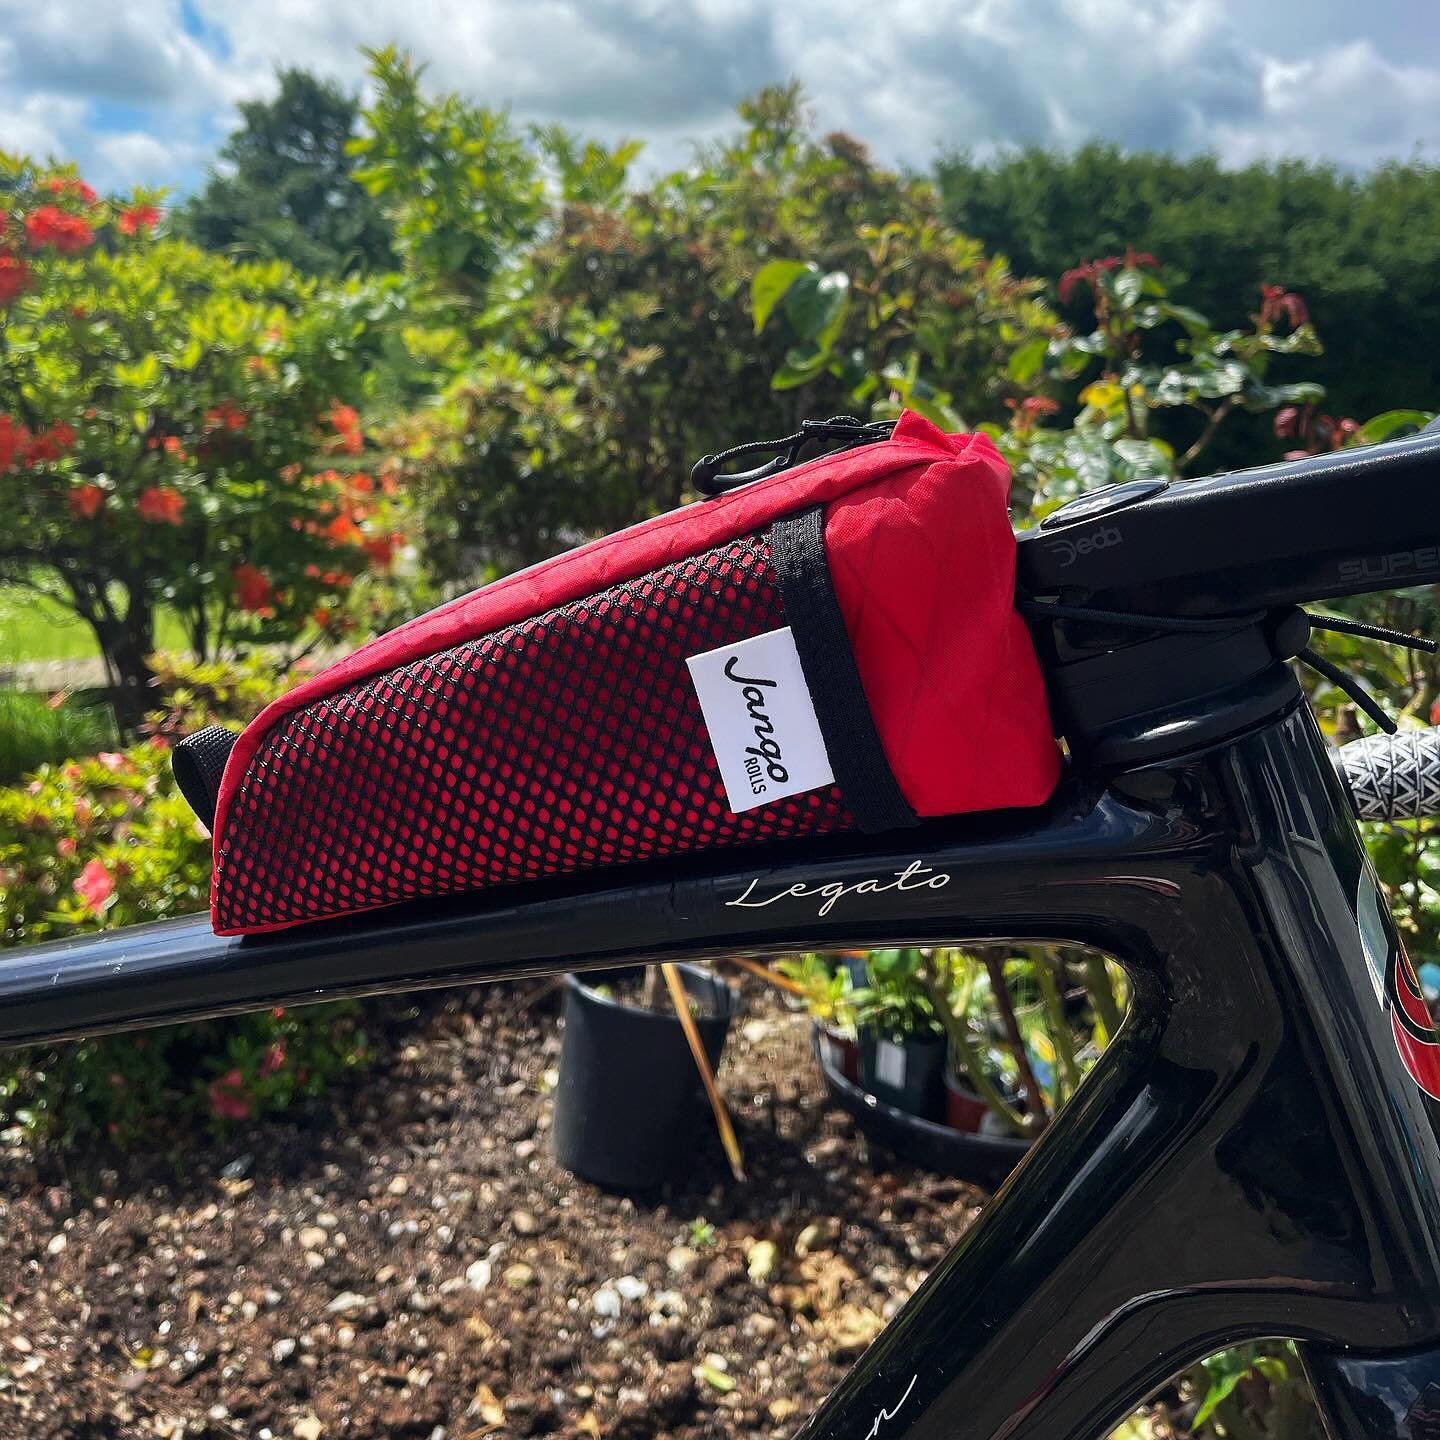 Rolling into a Bank holiday. 🌹

After being peppered with rain all weekend. Here&rsquo;s to a drier day. 🤞

Free UK delivery on all orders. Free international delivery on orders over &pound;100.

#jangorolls #toolroll #gravelbike #gravelgrinder #cy